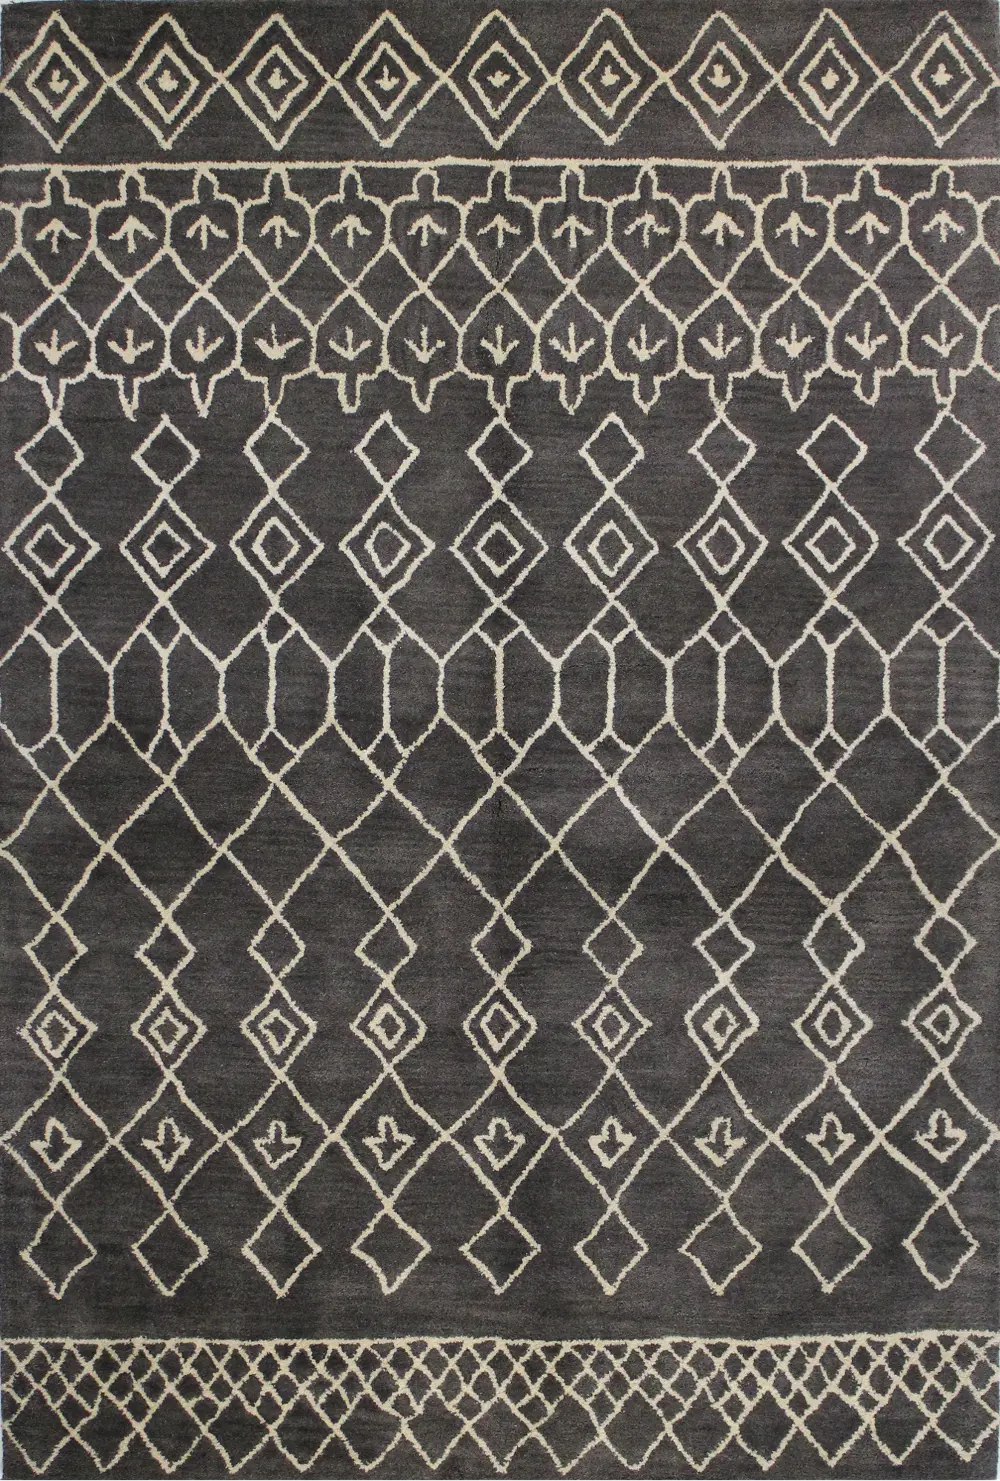 S185-CHAR-4X6-ST258 4 x 6 Small Charcoal Gray Area Rug - Chelsea-1